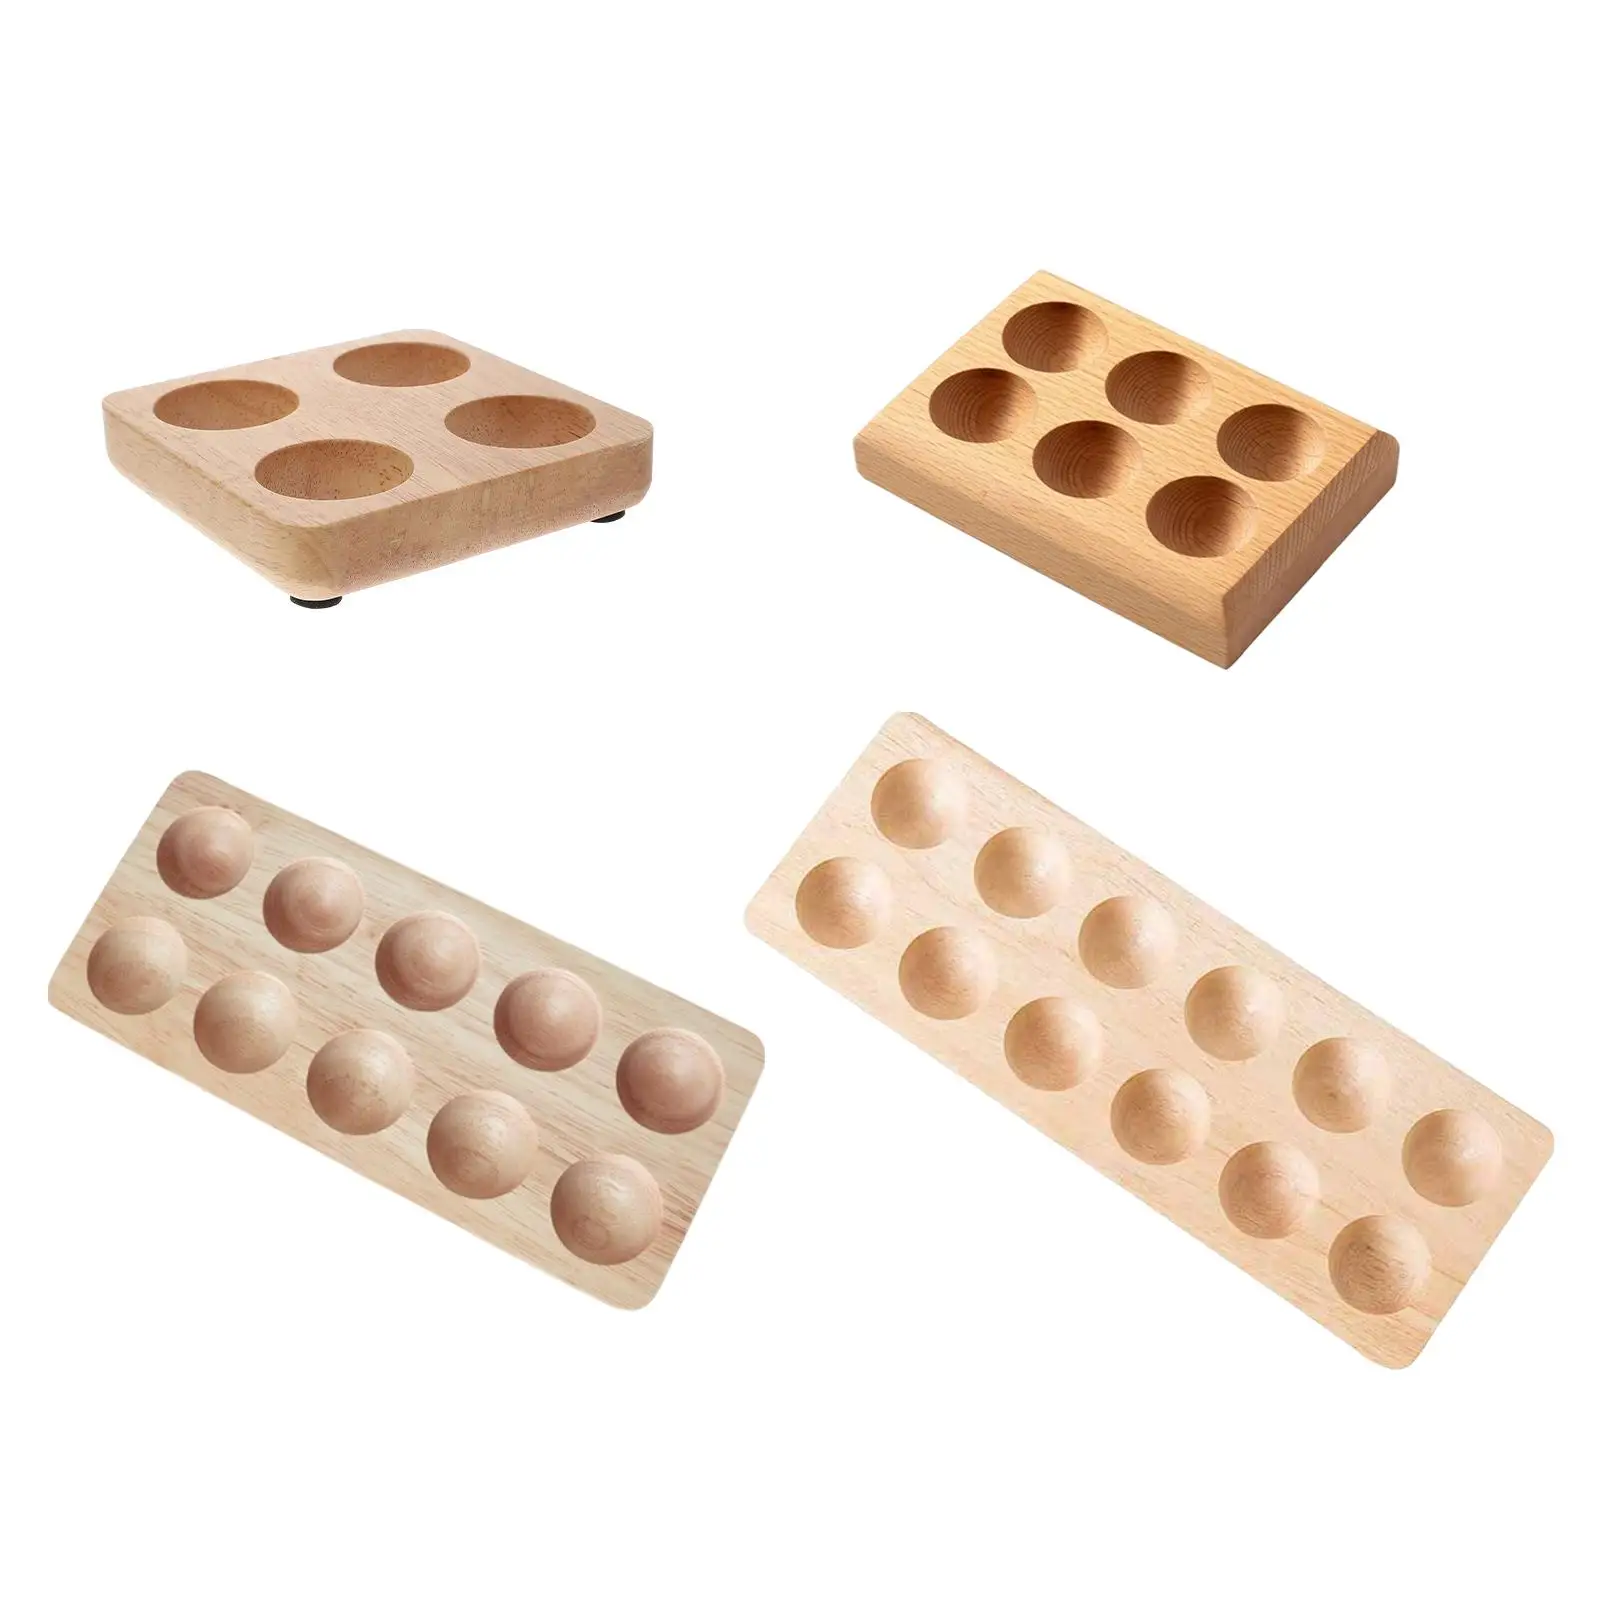 Wooden Egg Holder Sturdy Durable Portable Organizer Rack Storage Tray Container for Household Restaurant Countertop Pantry